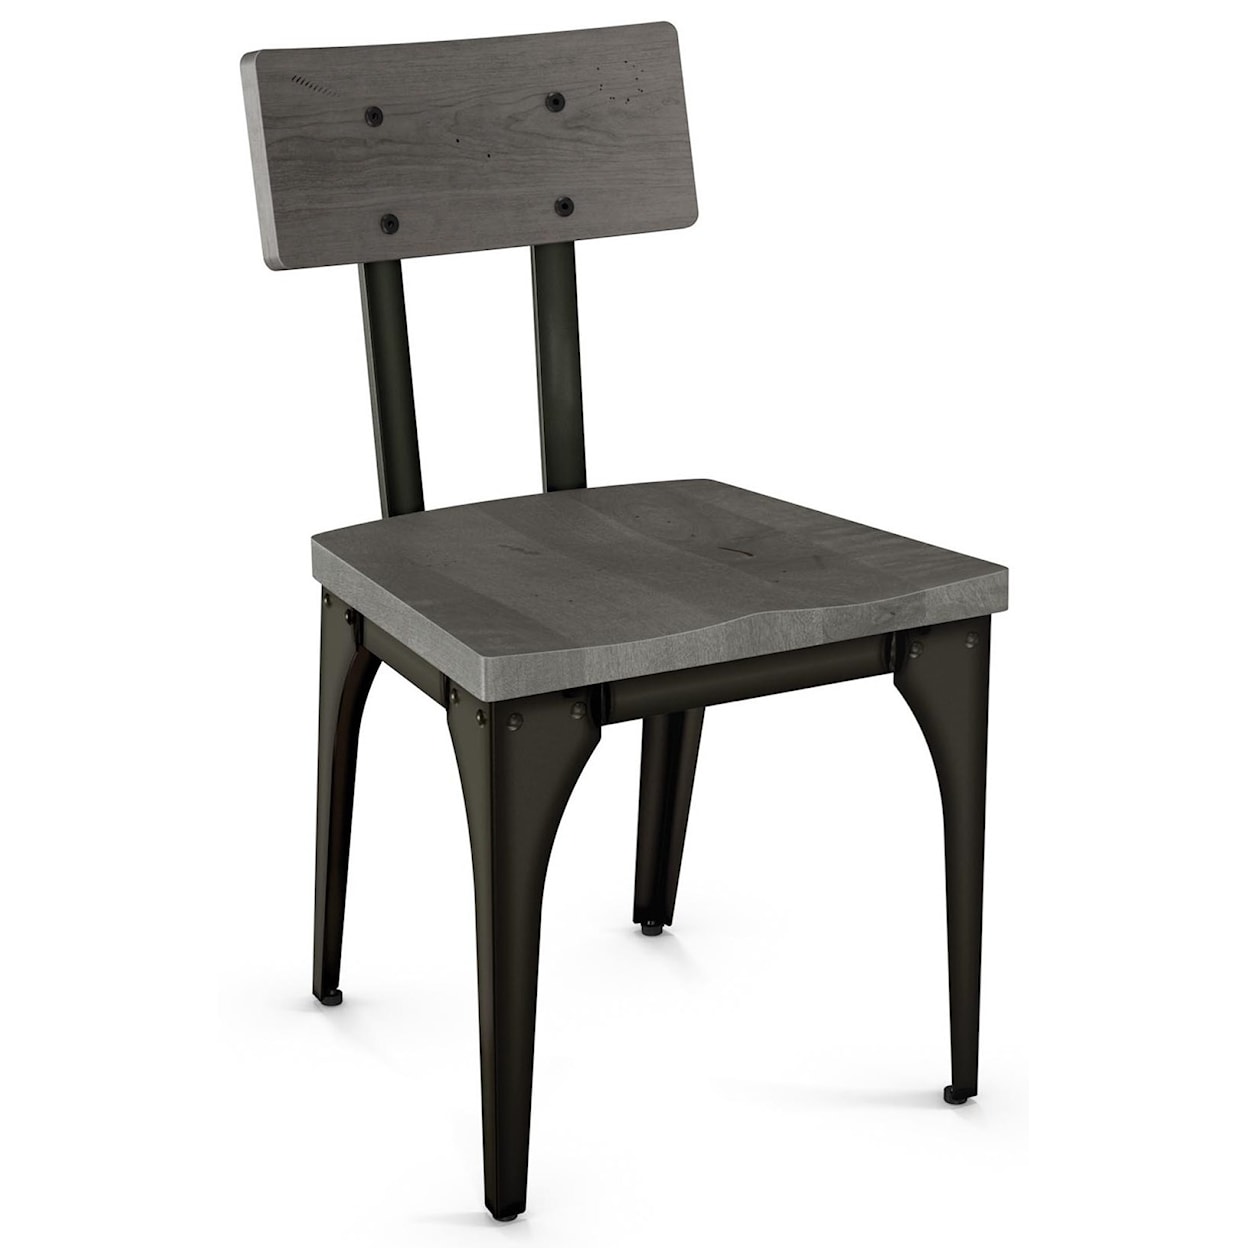 Amisco Industrial Architect Chair with Wood Seat